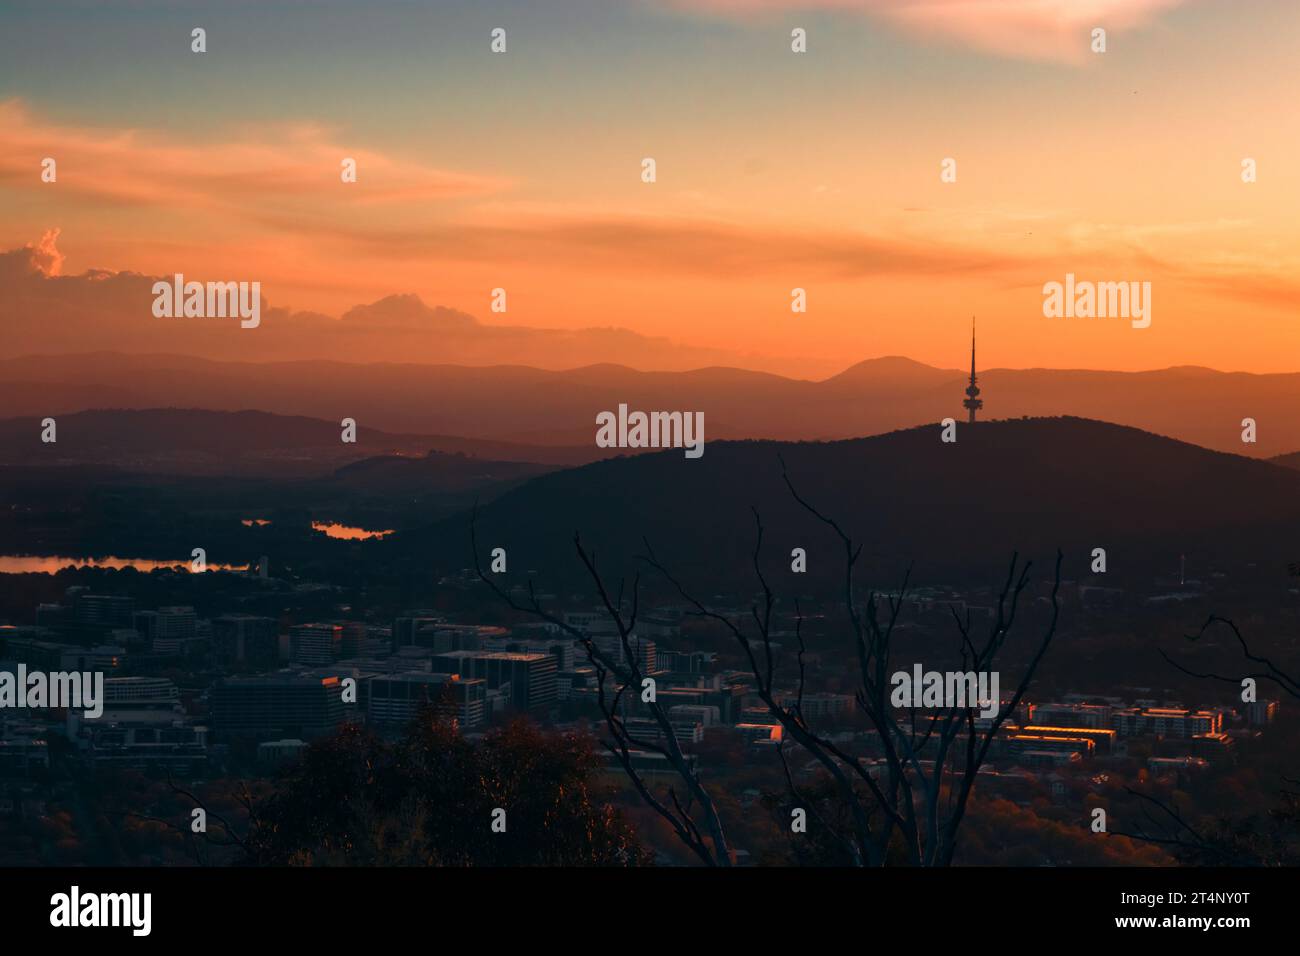 Canberra Civic At Dusk, View from Mount Ainslie, City landscape at Dusk with Telstra Tower in the distance Stock Photo